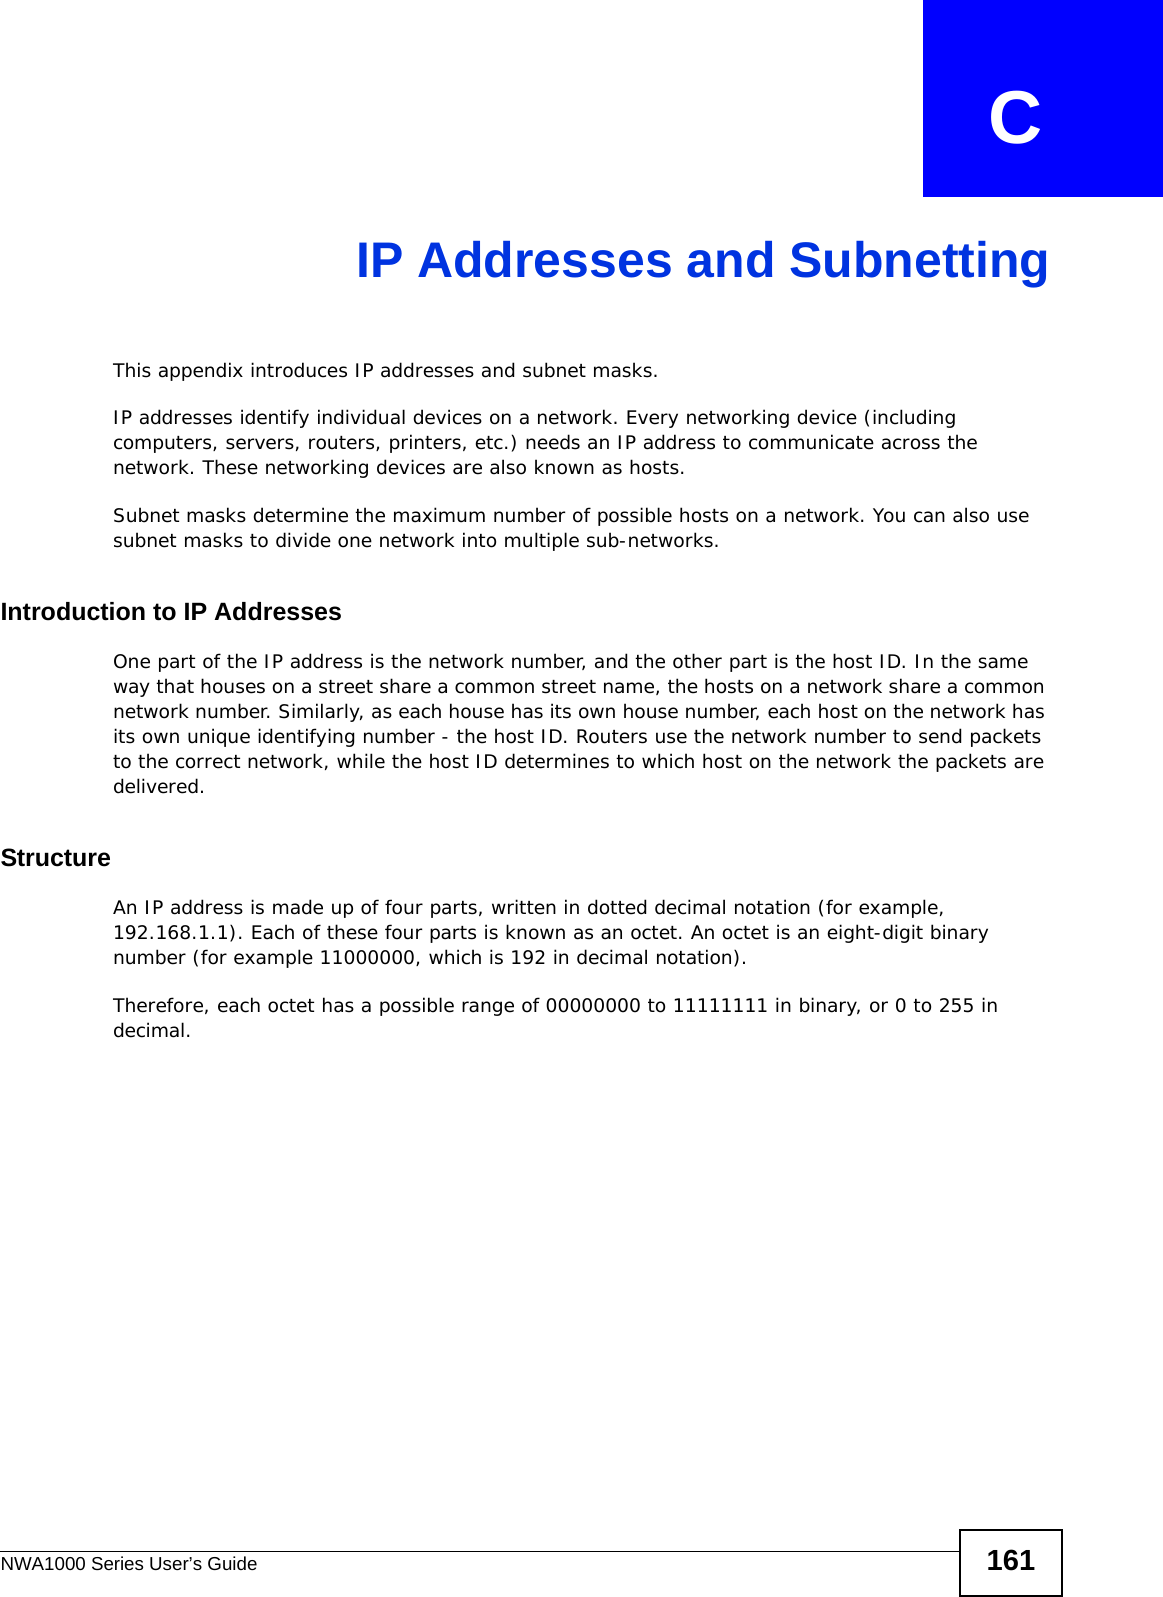 NWA1000 Series User’s Guide 161APPENDIX   CIP Addresses and SubnettingThis appendix introduces IP addresses and subnet masks. IP addresses identify individual devices on a network. Every networking device (including computers, servers, routers, printers, etc.) needs an IP address to communicate across the network. These networking devices are also known as hosts.Subnet masks determine the maximum number of possible hosts on a network. You can also use subnet masks to divide one network into multiple sub-networks.Introduction to IP AddressesOne part of the IP address is the network number, and the other part is the host ID. In the same way that houses on a street share a common street name, the hosts on a network share a common network number. Similarly, as each house has its own house number, each host on the network has its own unique identifying number - the host ID. Routers use the network number to send packets to the correct network, while the host ID determines to which host on the network the packets are delivered.StructureAn IP address is made up of four parts, written in dotted decimal notation (for example, 192.168.1.1). Each of these four parts is known as an octet. An octet is an eight-digit binary number (for example 11000000, which is 192 in decimal notation). Therefore, each octet has a possible range of 00000000 to 11111111 in binary, or 0 to 255 in decimal.